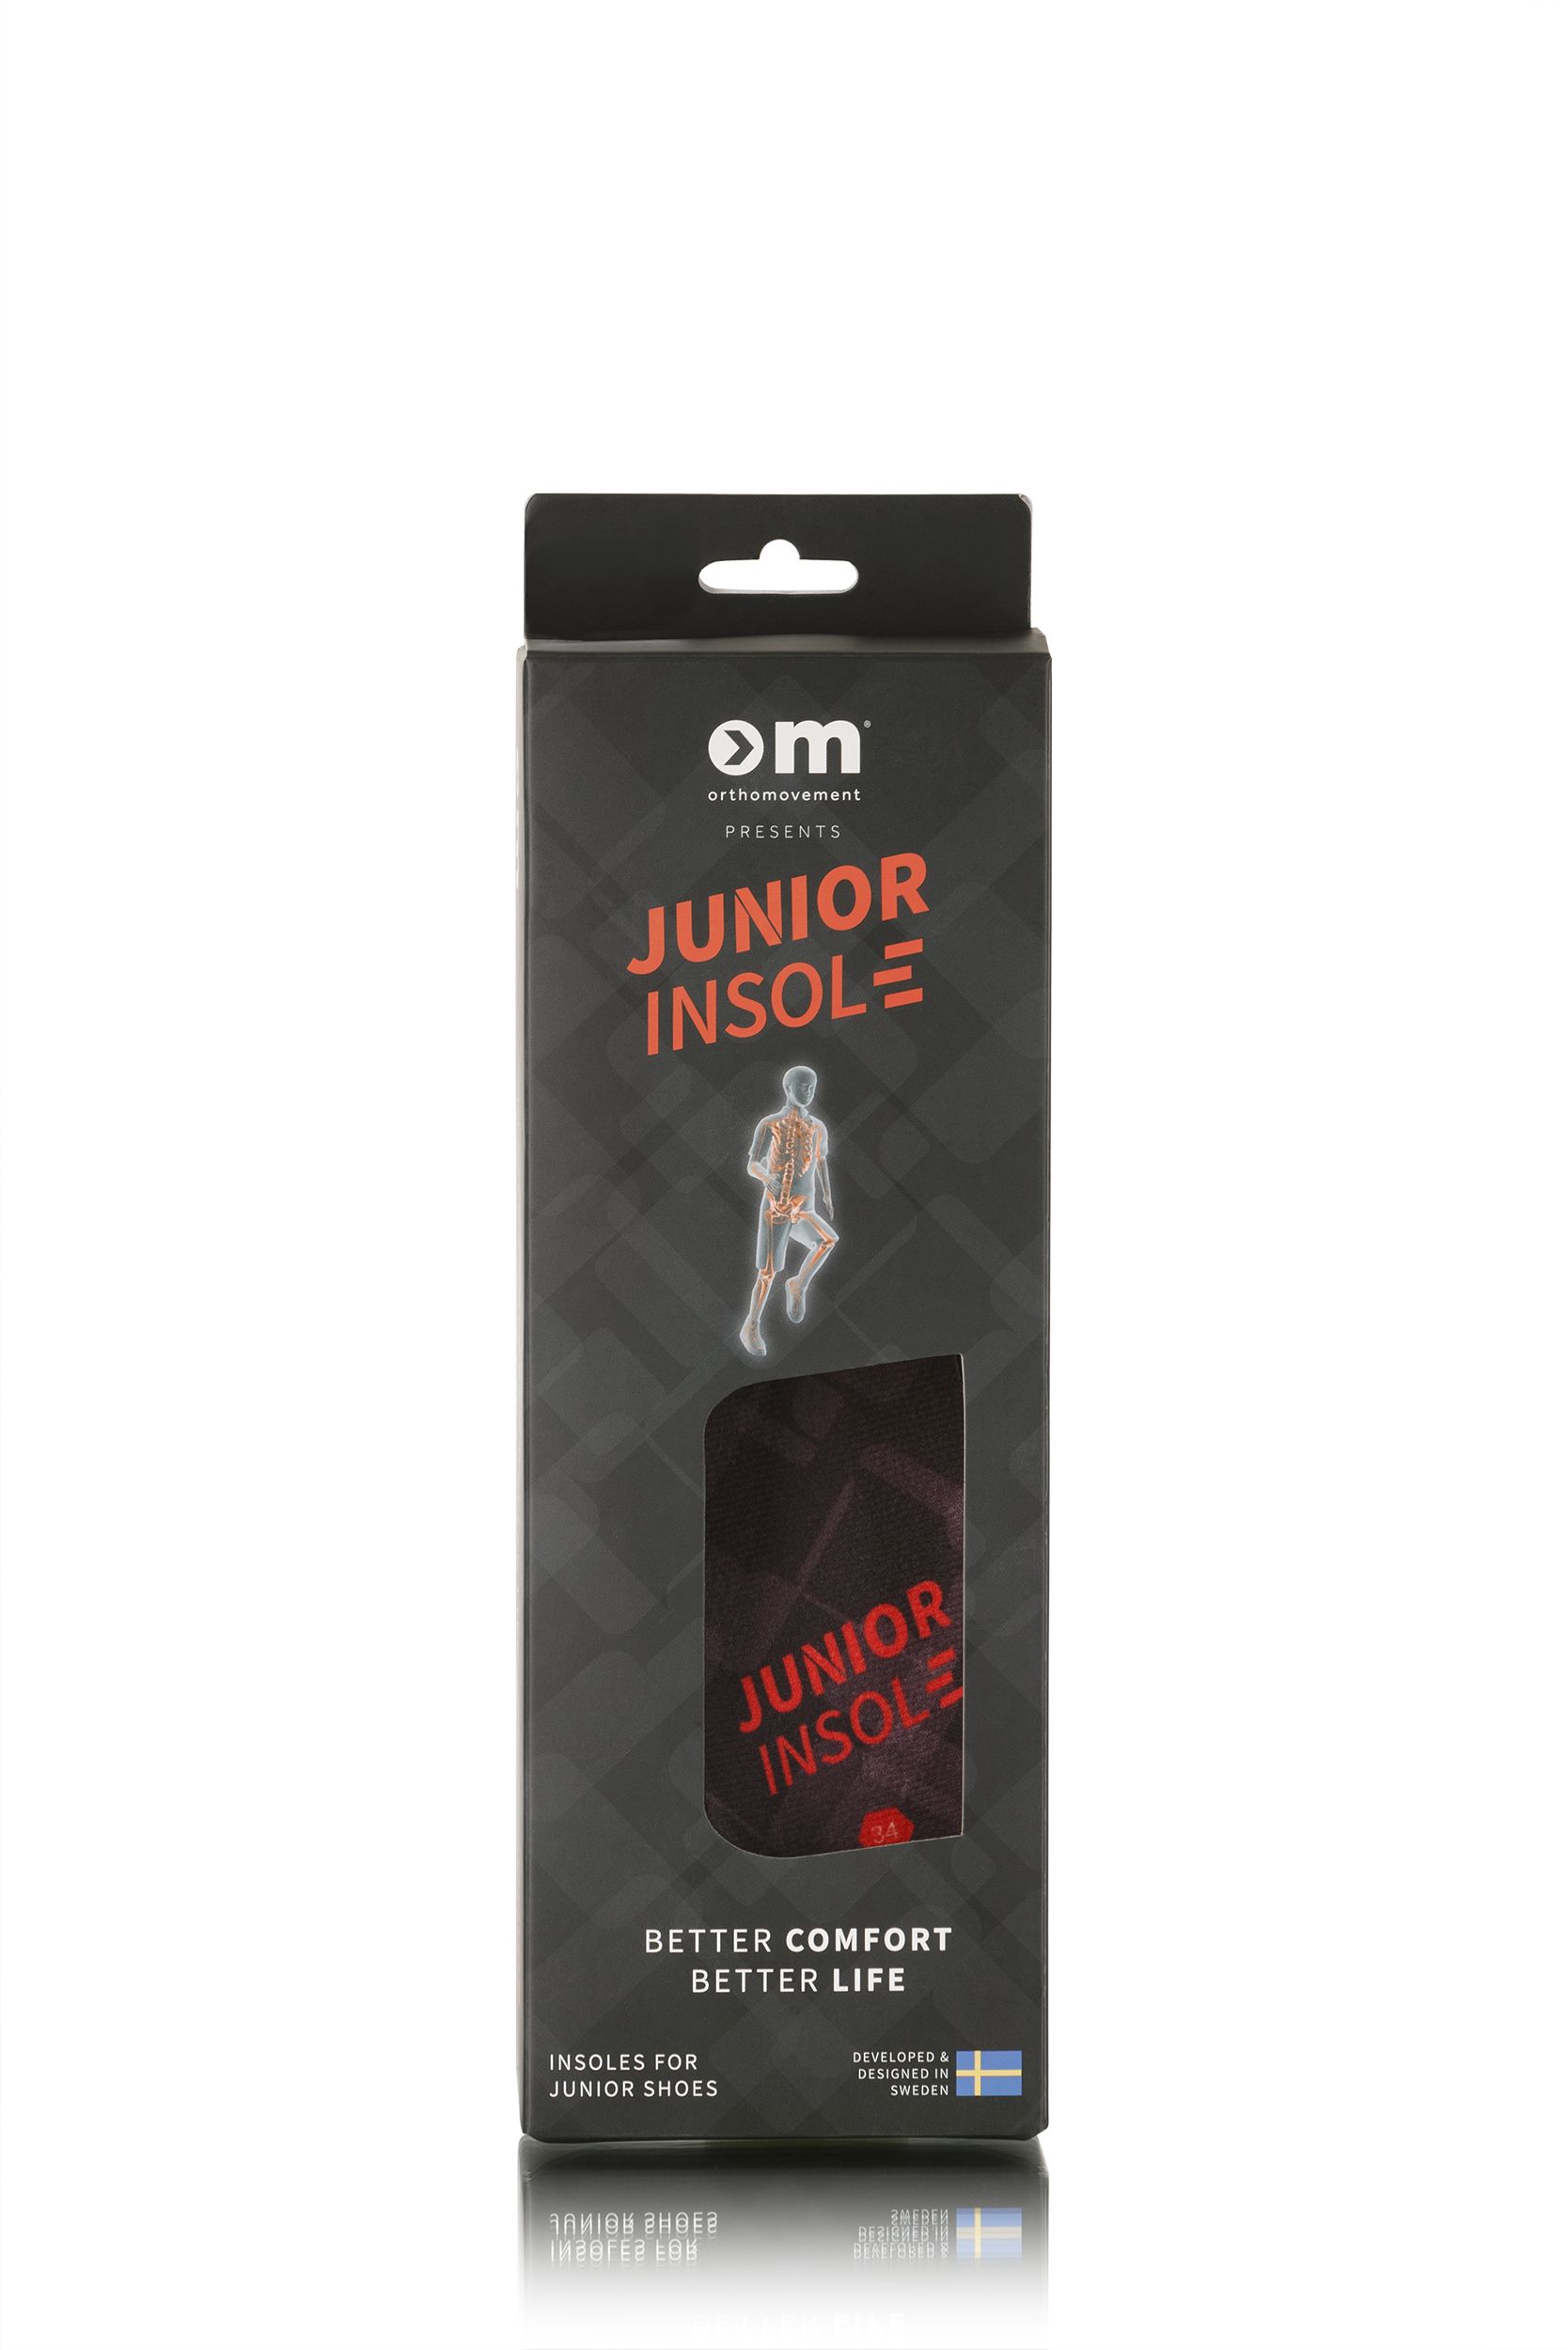 ORTHO MOVEMENT, JUNIOR INSOLE